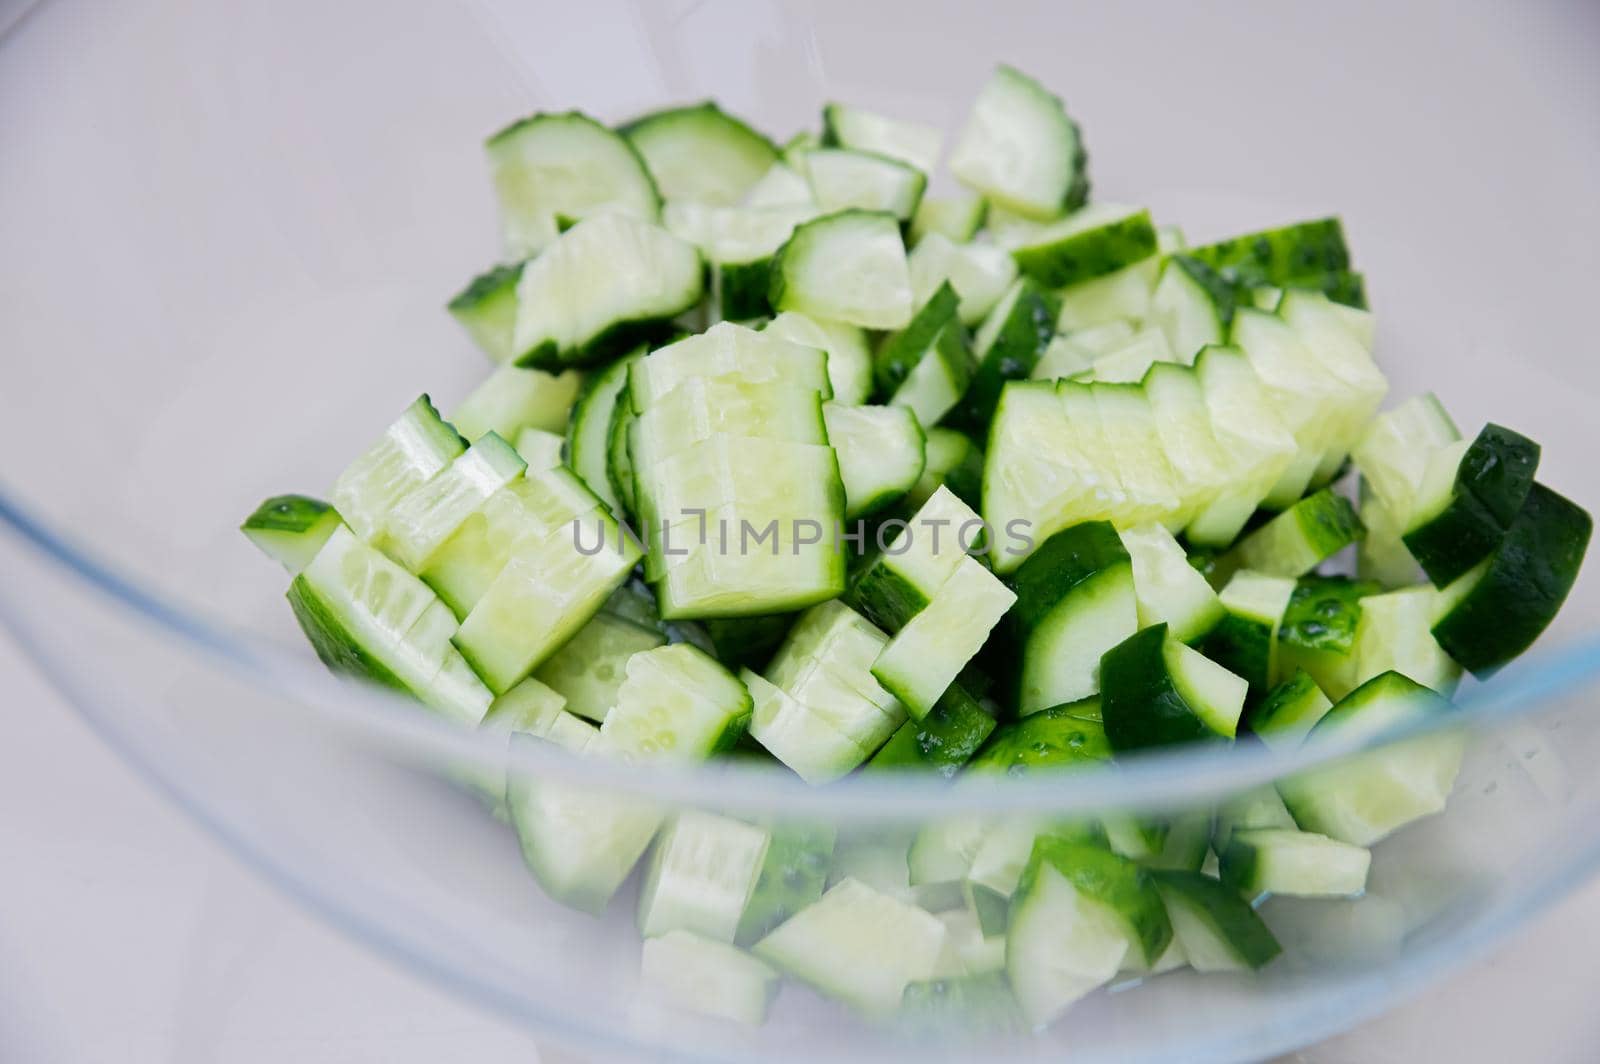 Fresh cucumber sliced for cooking vegetable salad in a glass transparent bowl on the kitchen table. Shallow depth of field by yanik88